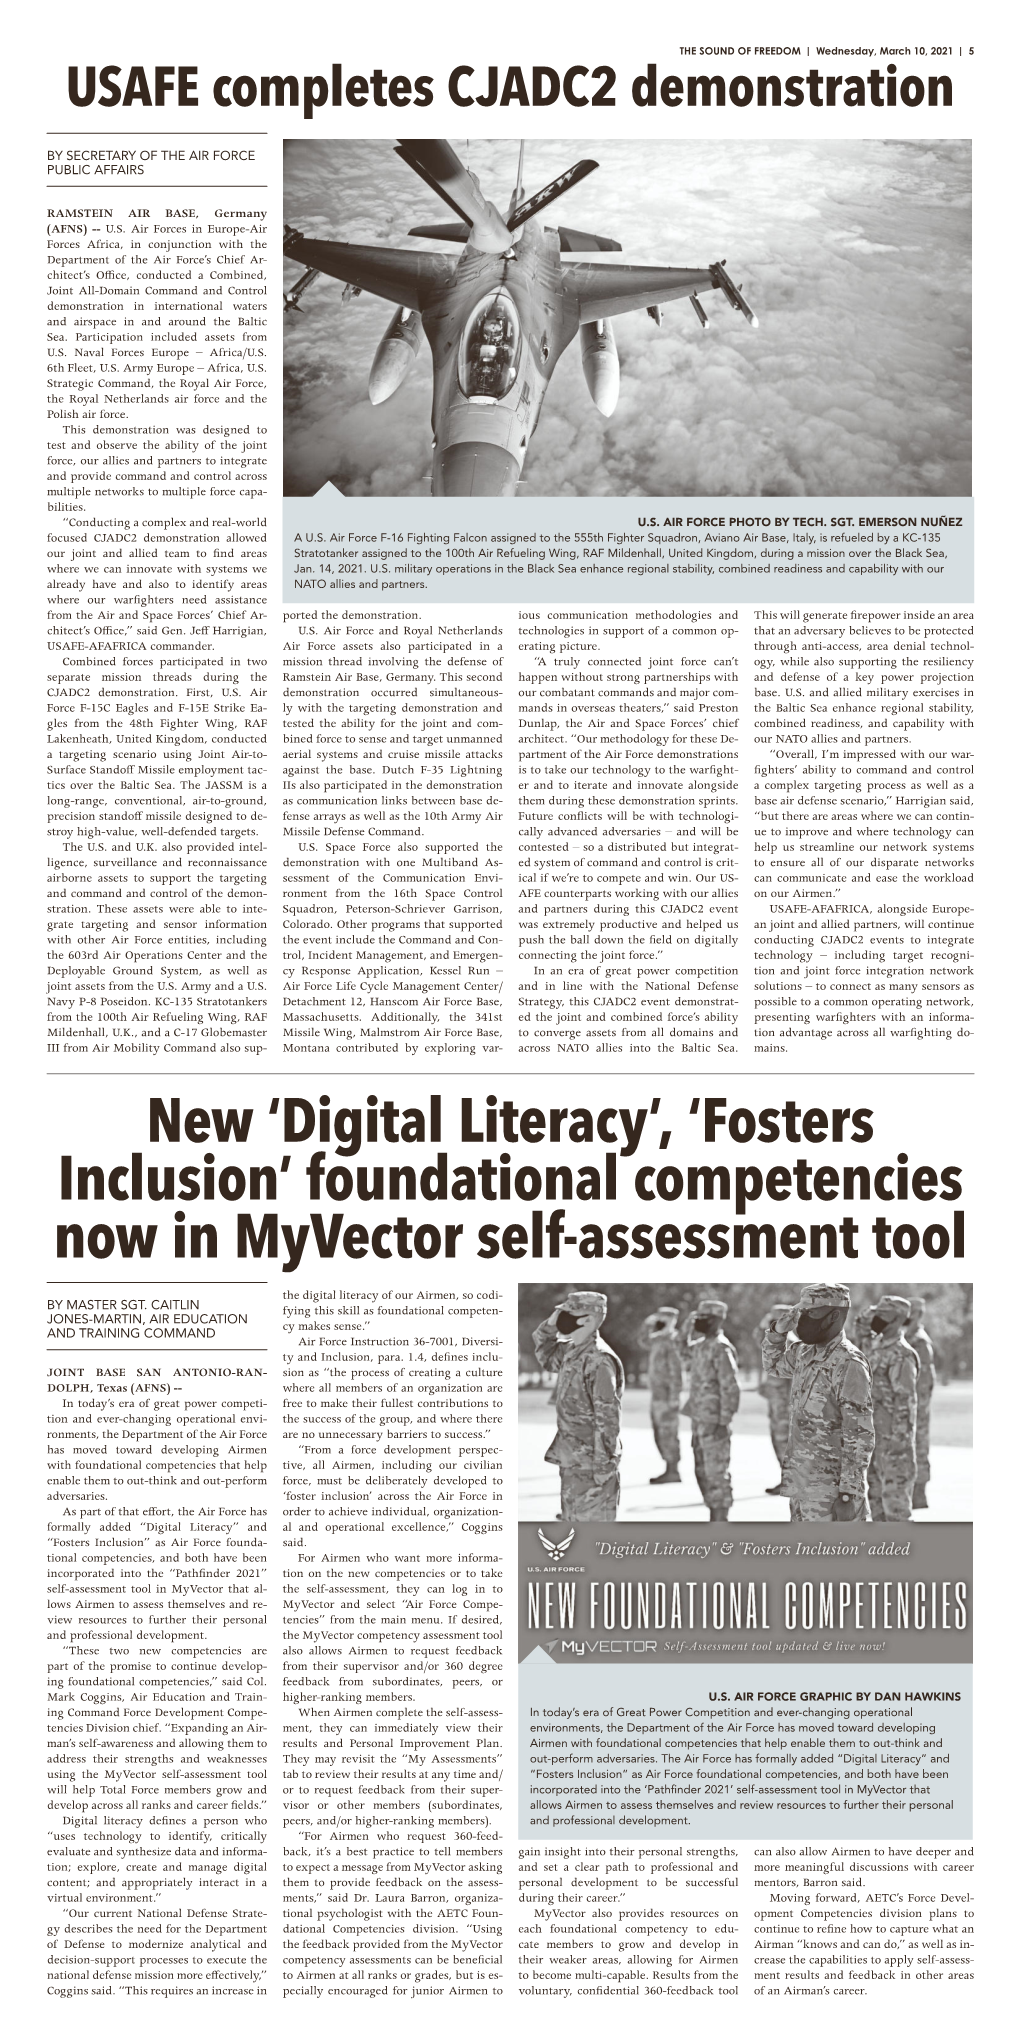 Digital Literacy’, ‘Fosters Inclusion’ Foundational Competencies Now in Myvector Self-Assessment Tool